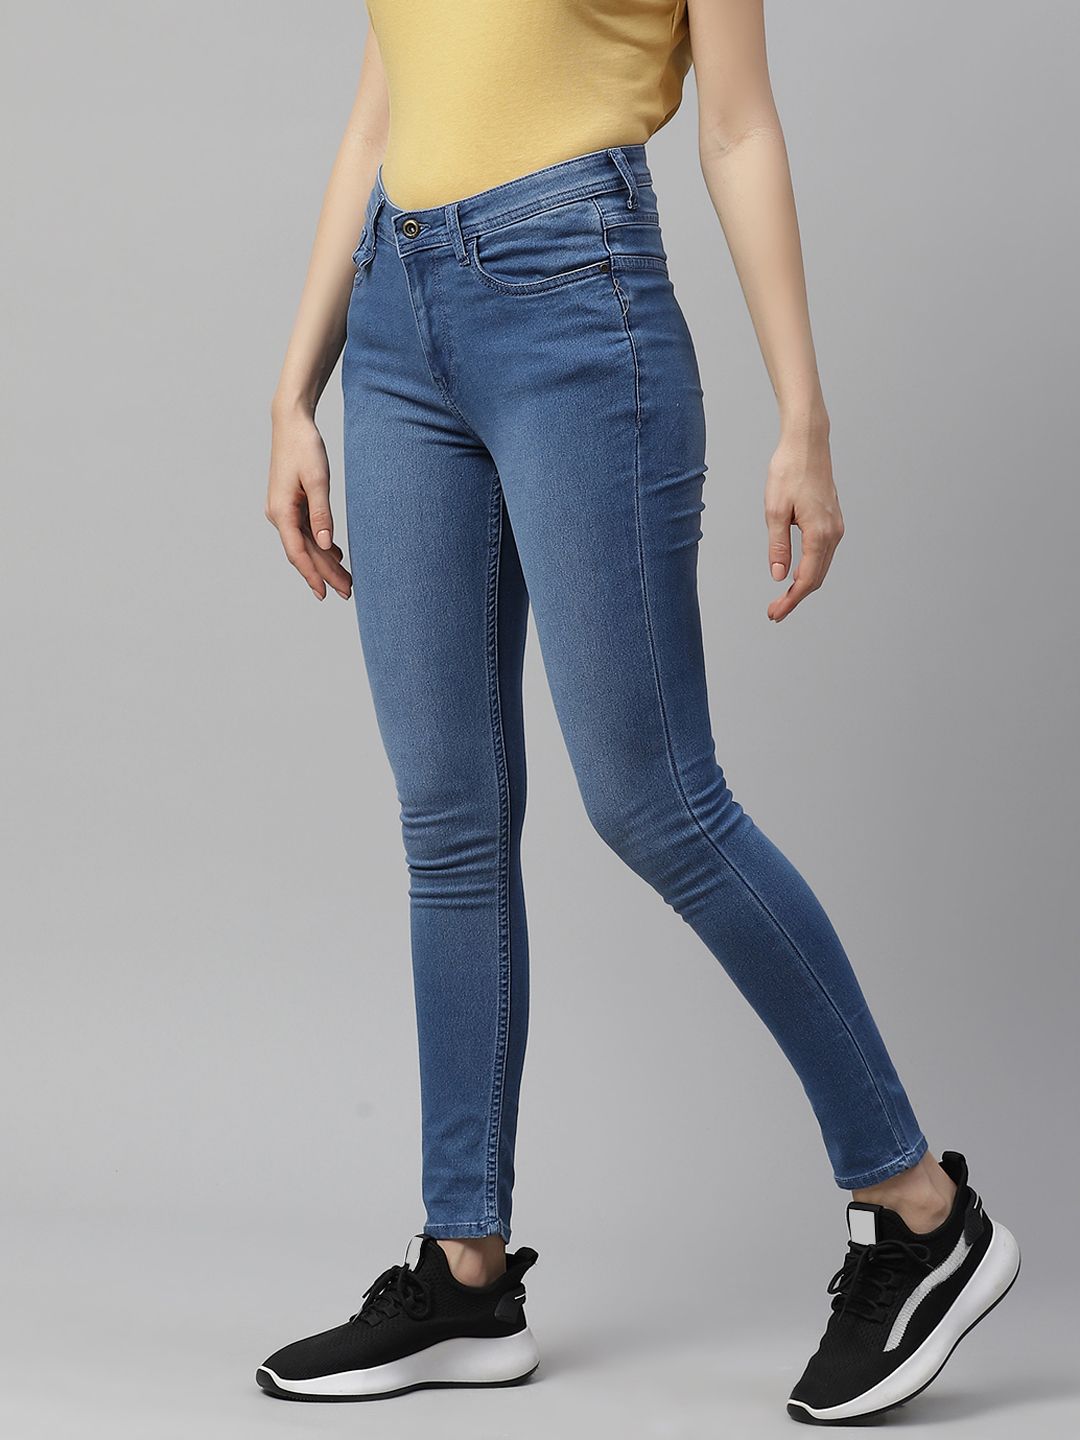 The Roadster Lifestyle Co Women Blue Super Skinny Fit Light Fade Stretchable Jeans Price in India